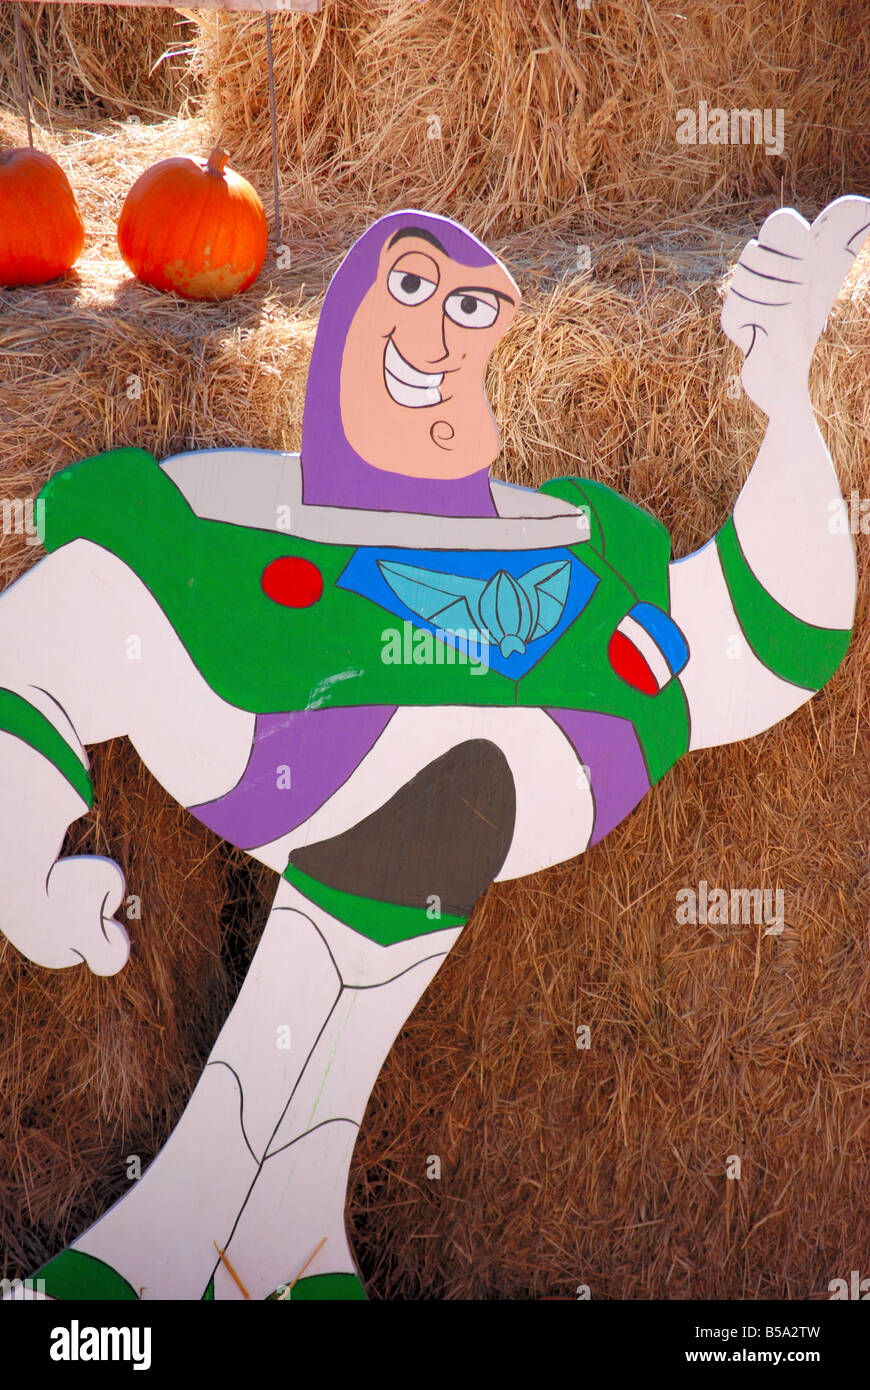 Buzz Lightyear wooden sign pointing to the entrance of a children's maze made out of hay bales Stock Photo